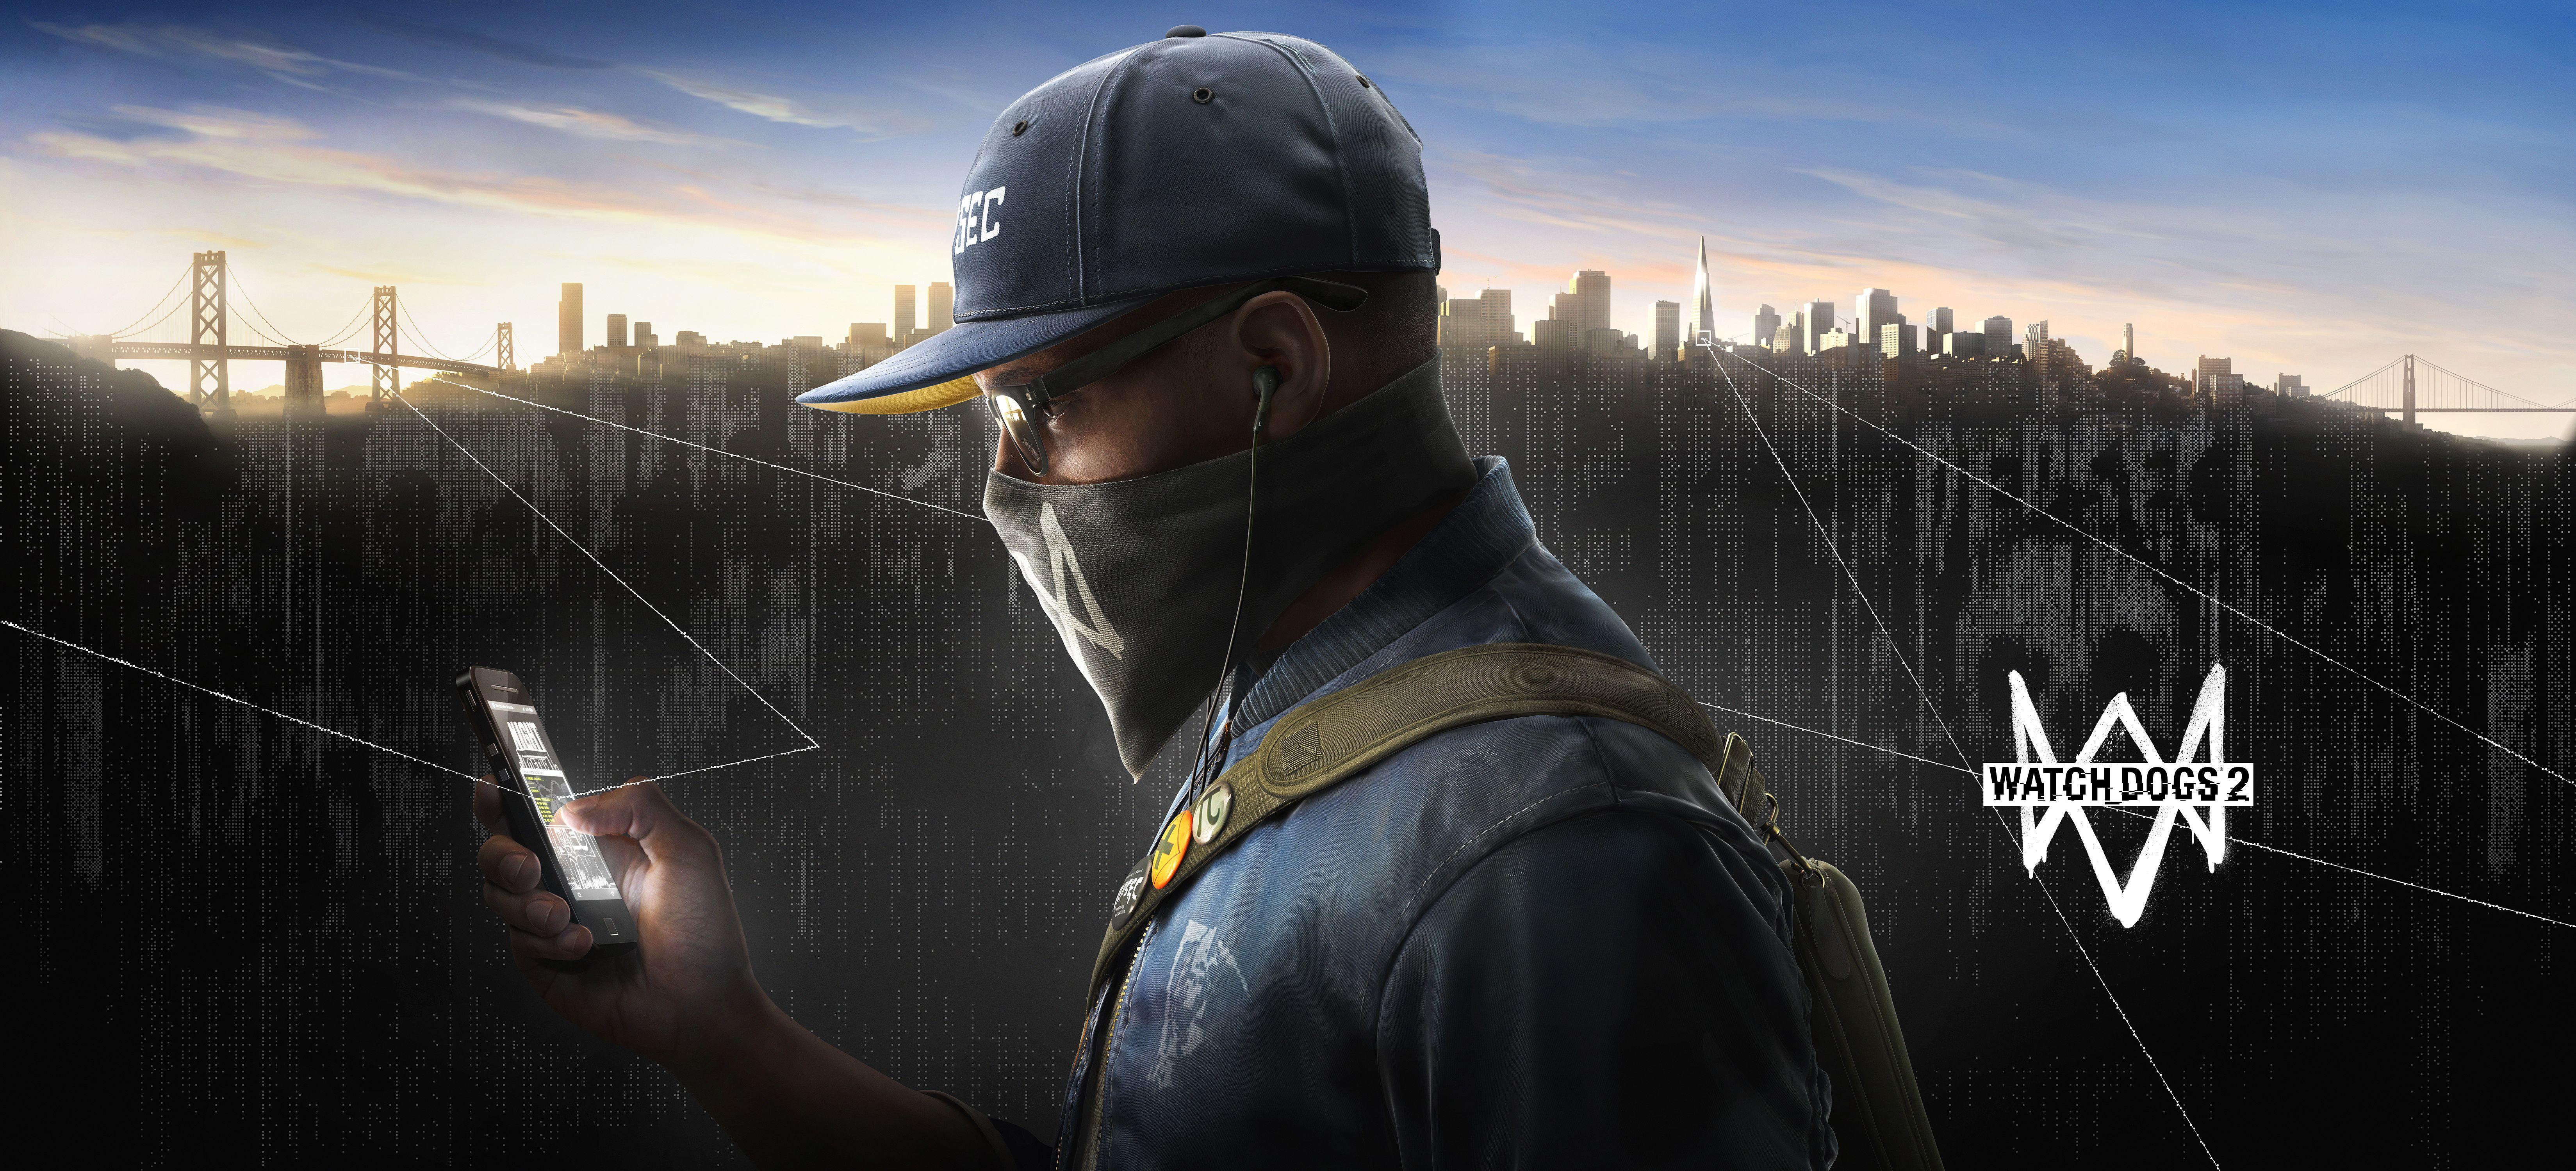 download watch dogs 2 pc full